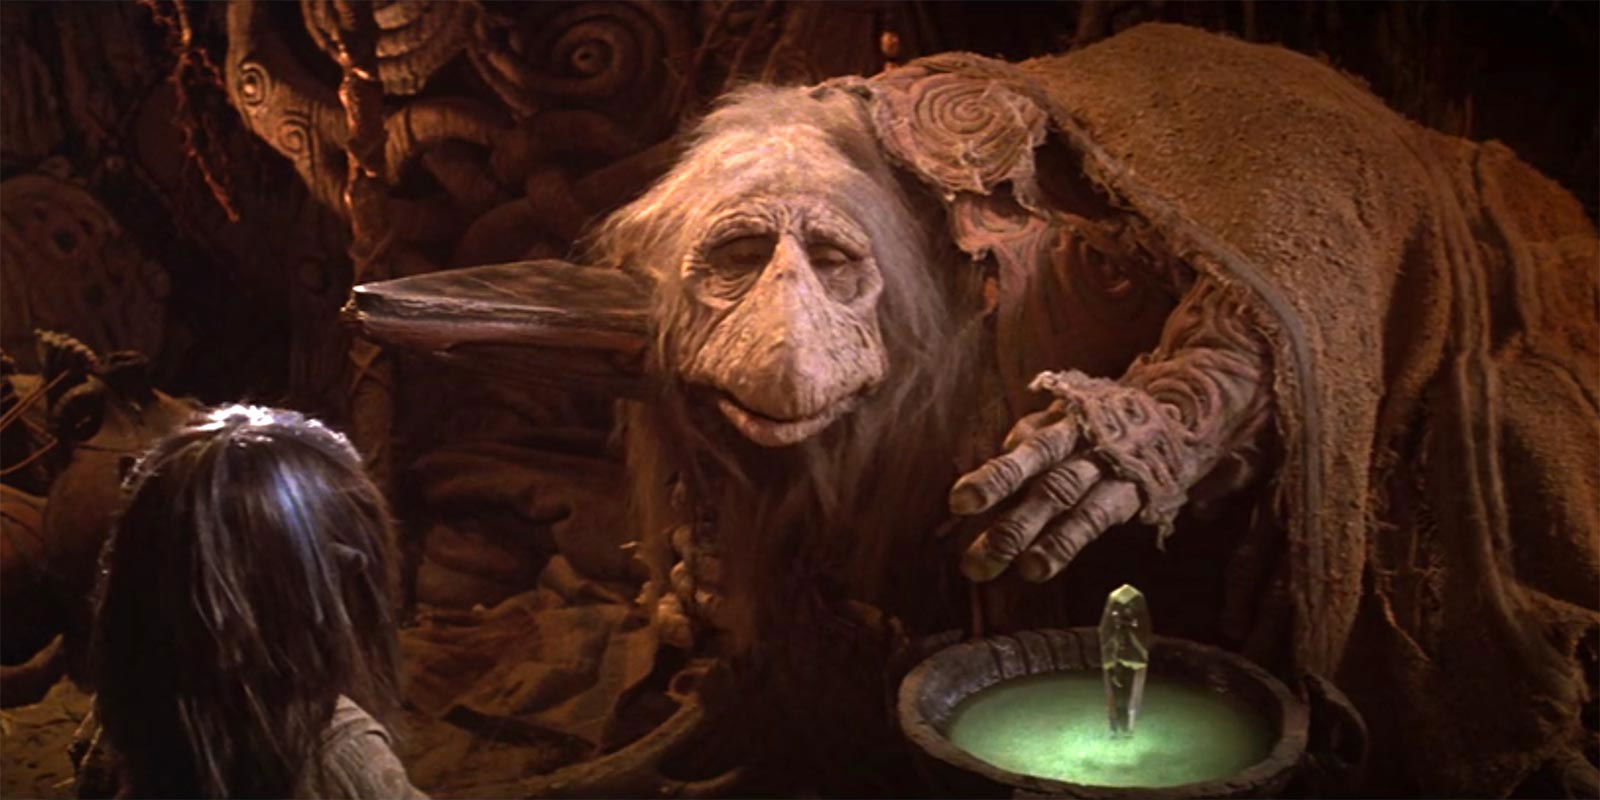 A large, wise-looking creature with long hair and a cloak leans over a glowing crystal in a dimly lit, intricate cave setting, while a smaller figure observes from the foreground.